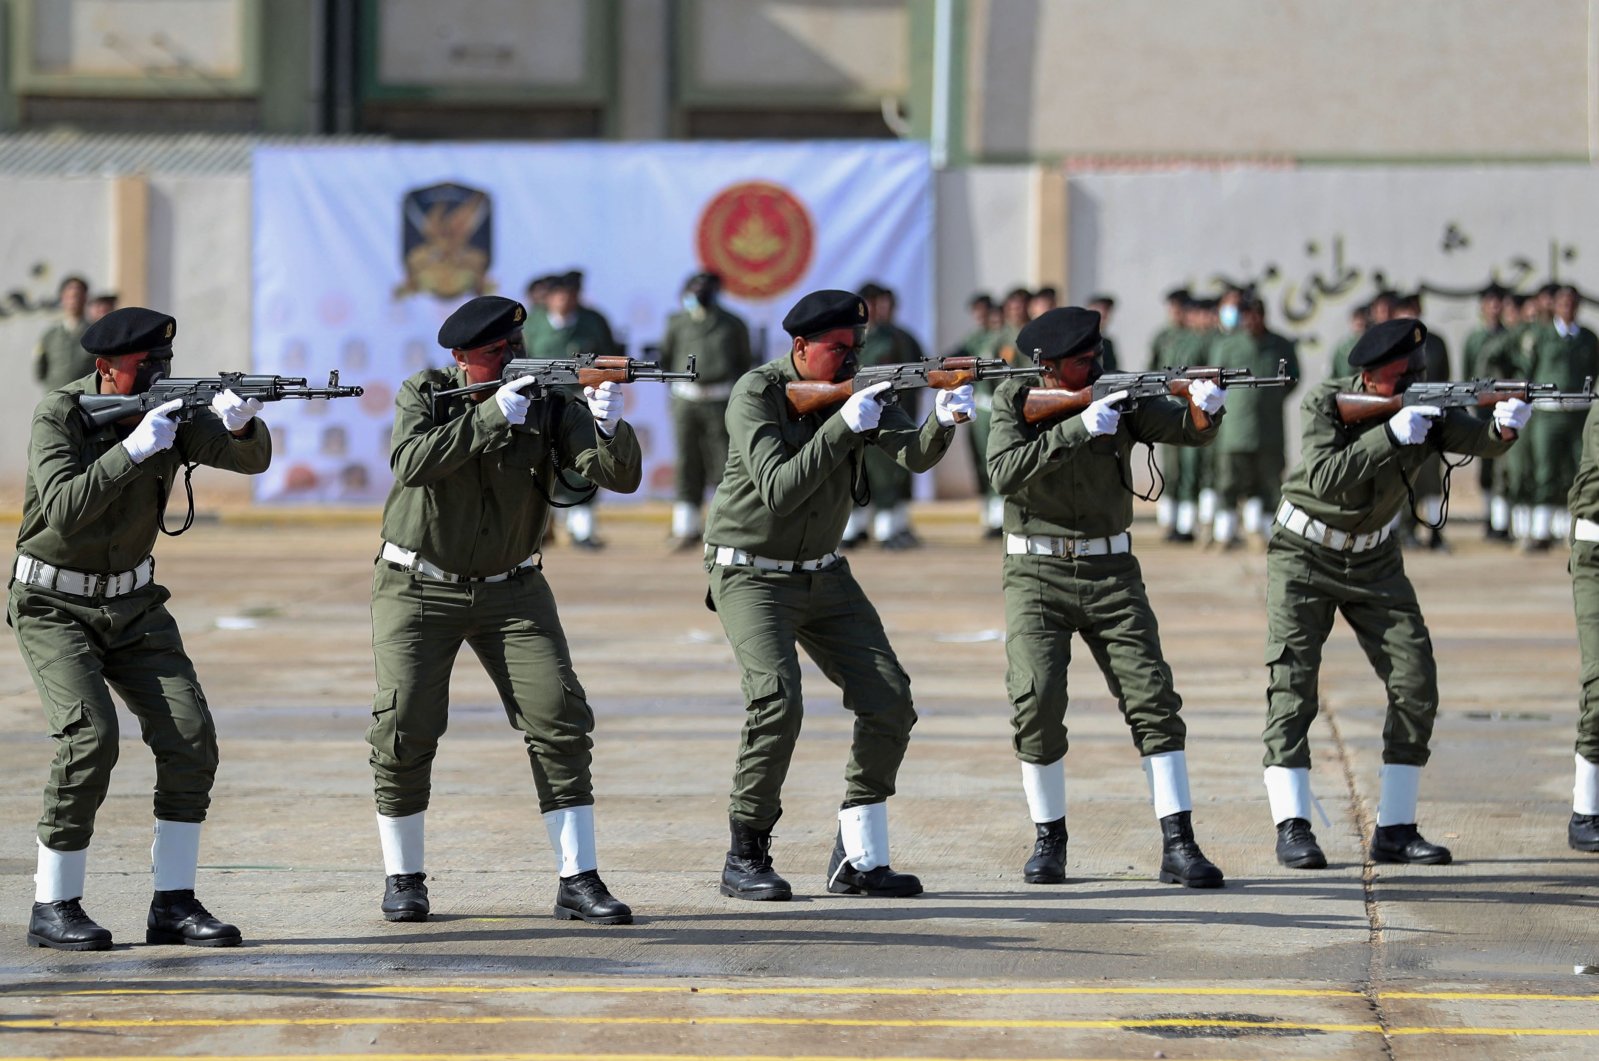 Libyan soldiers take part in a military parade during their graduation ceremony in the capital Tripoli, Libya, Jan. 23, 2022. (AFP Photo)